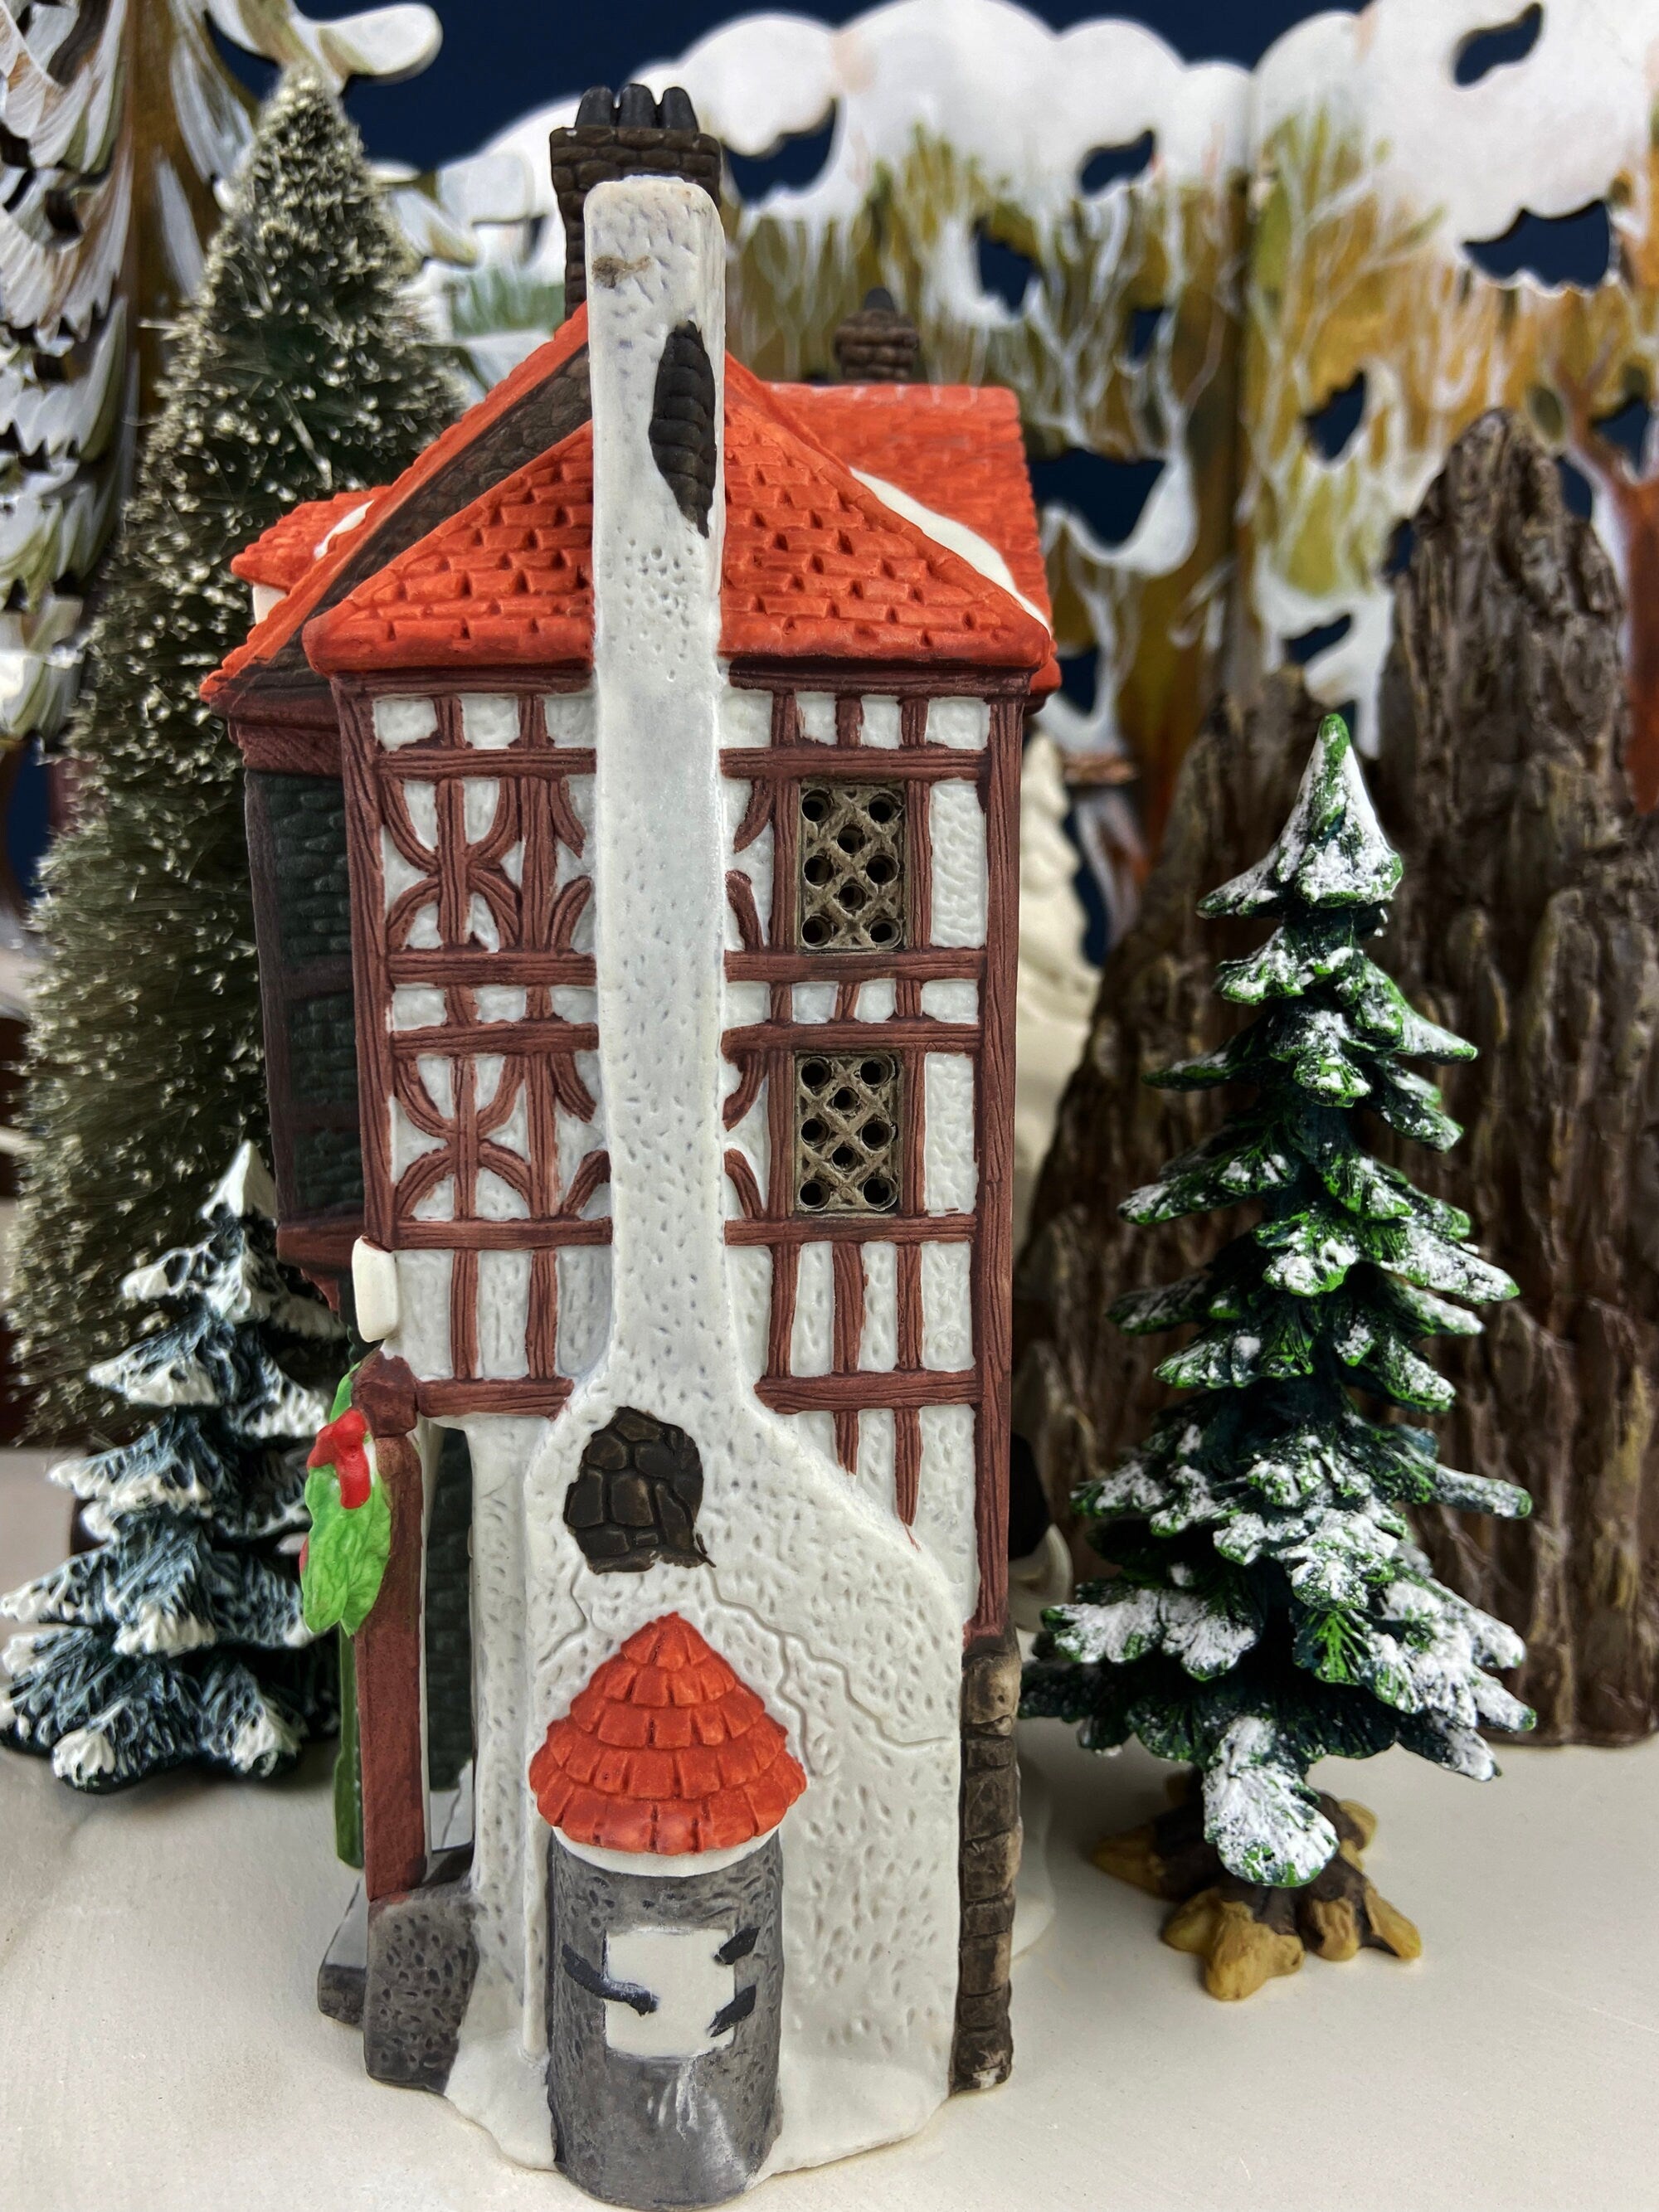 Christmas Village House by Dept 56. Illuminated Public House. Sweets.  Dickens Village Series. Made in Taiwan. Christmas Village/Diorama.